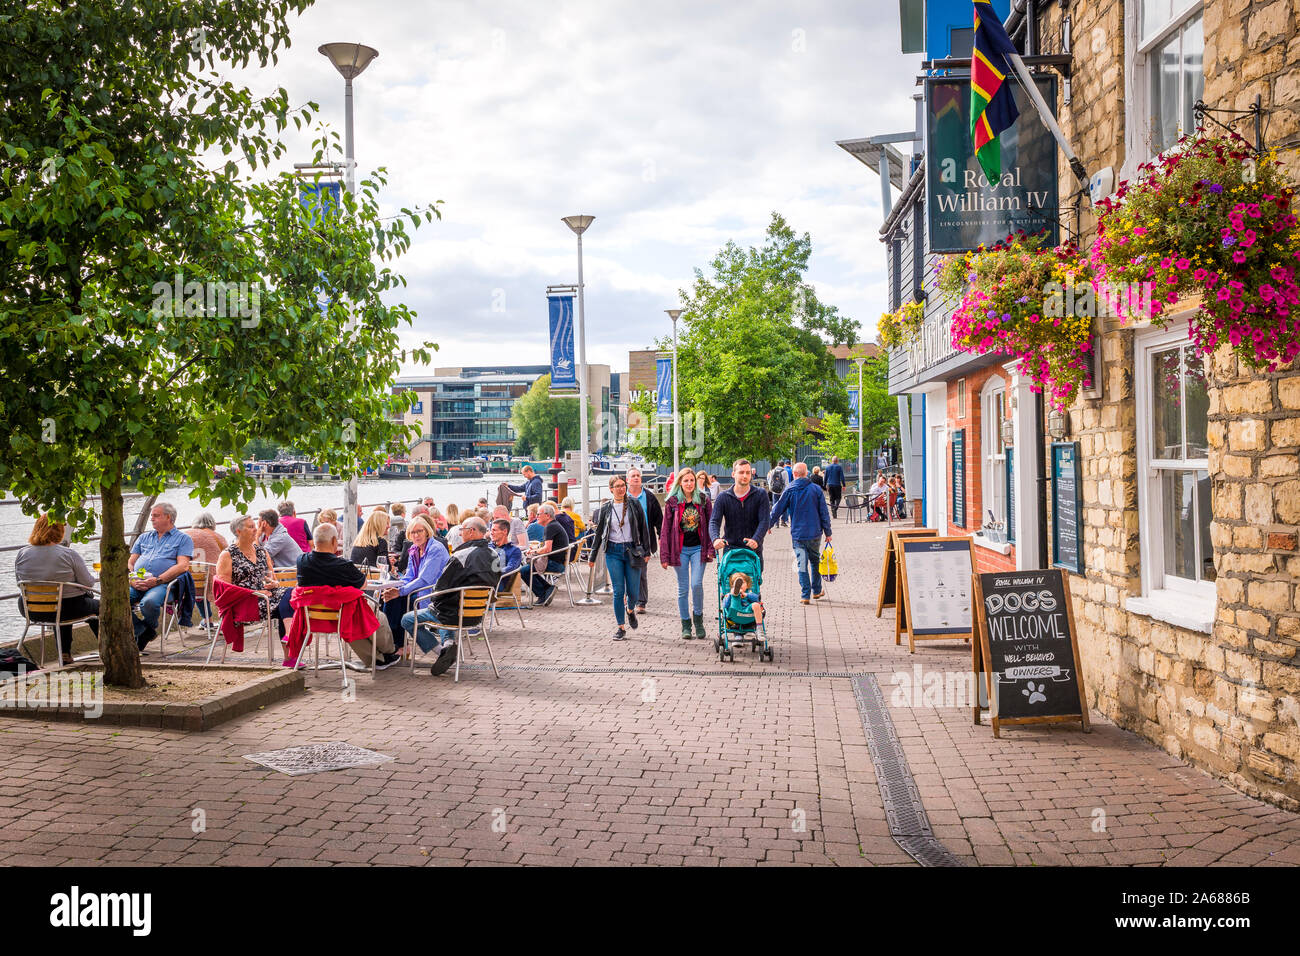 Tourists enjoying refreshments at the Royal William IV in on Brayford Waterside in Lincoln England UK in September Stock Photo